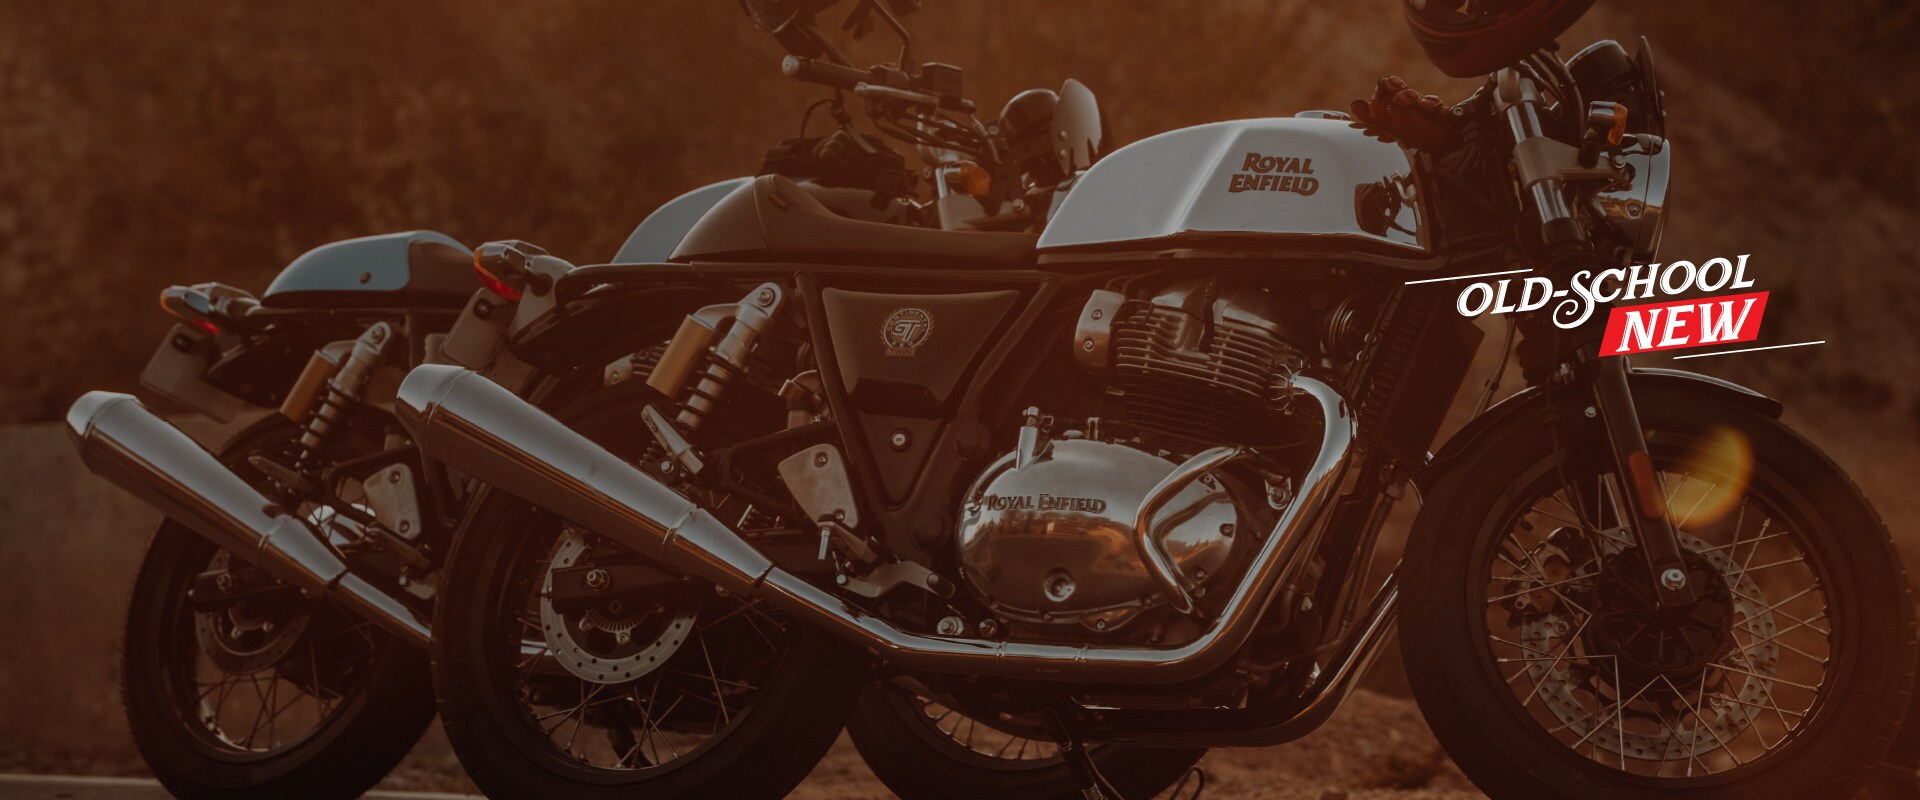 RE Continental GT 650 Price, Colours, Images & Mileage in India | Royal  Enfield